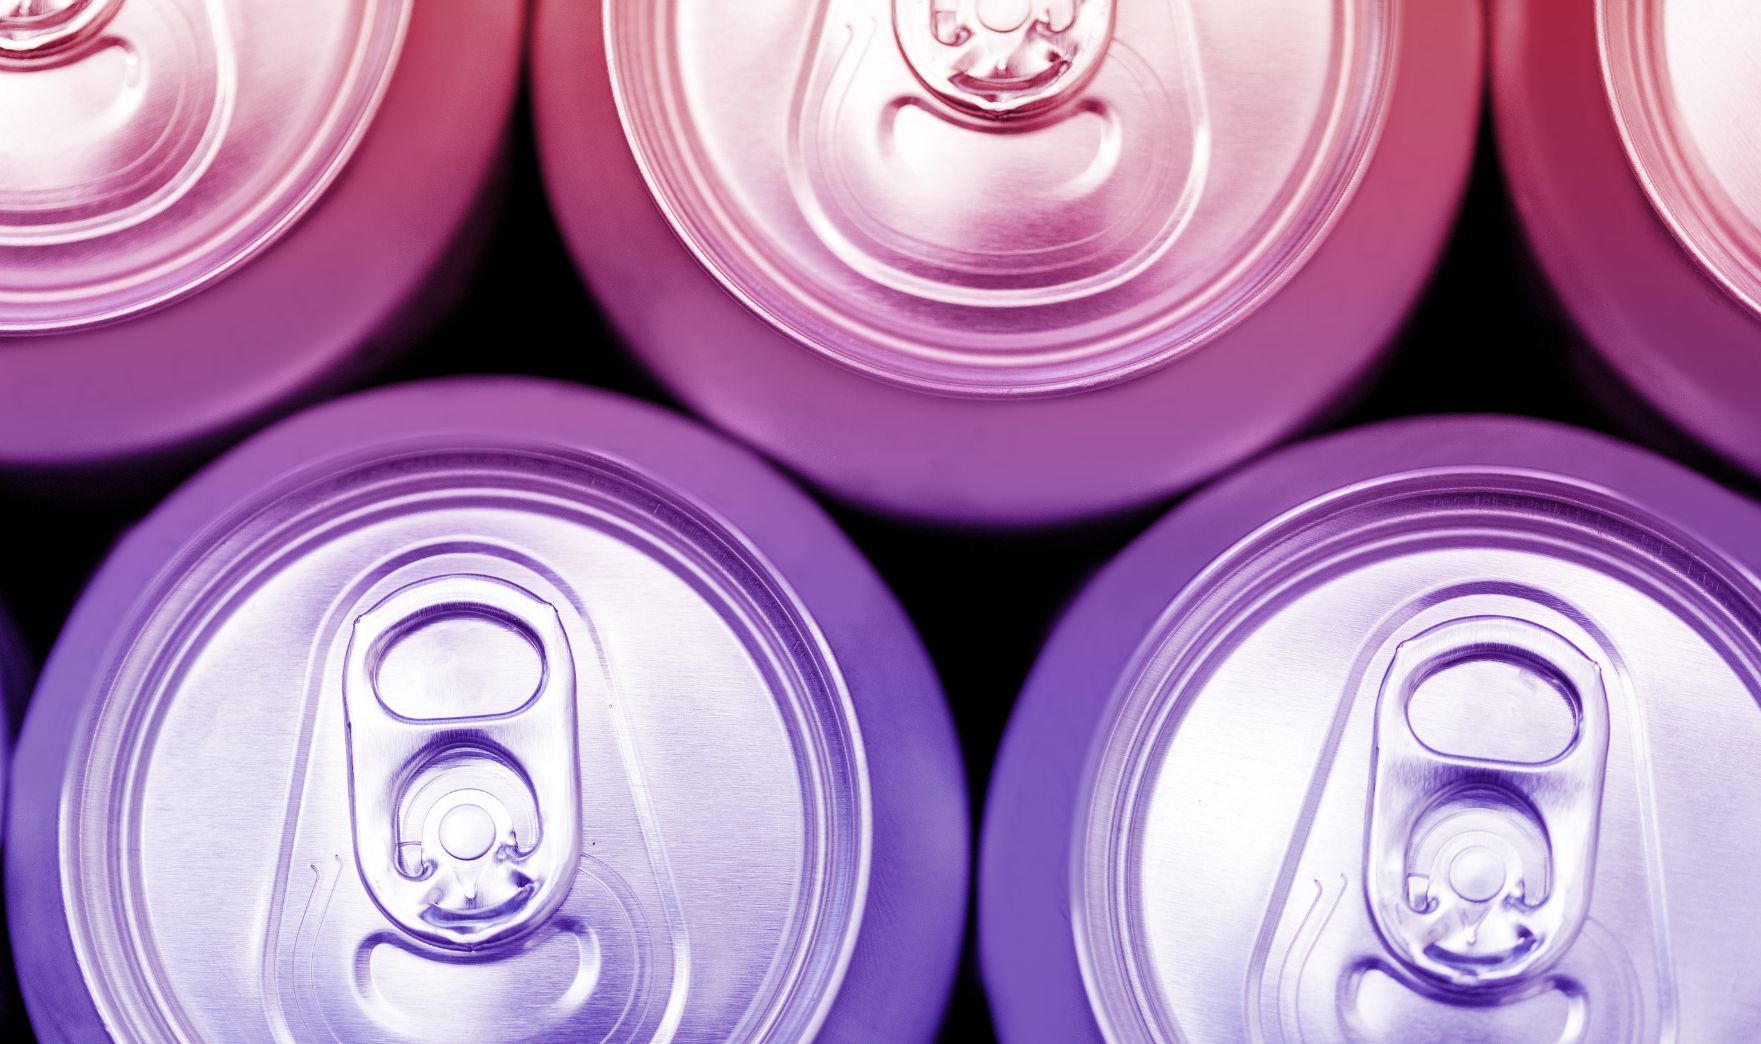 How a Healthy Energy Drink Led to a 327% Profit Opportunity